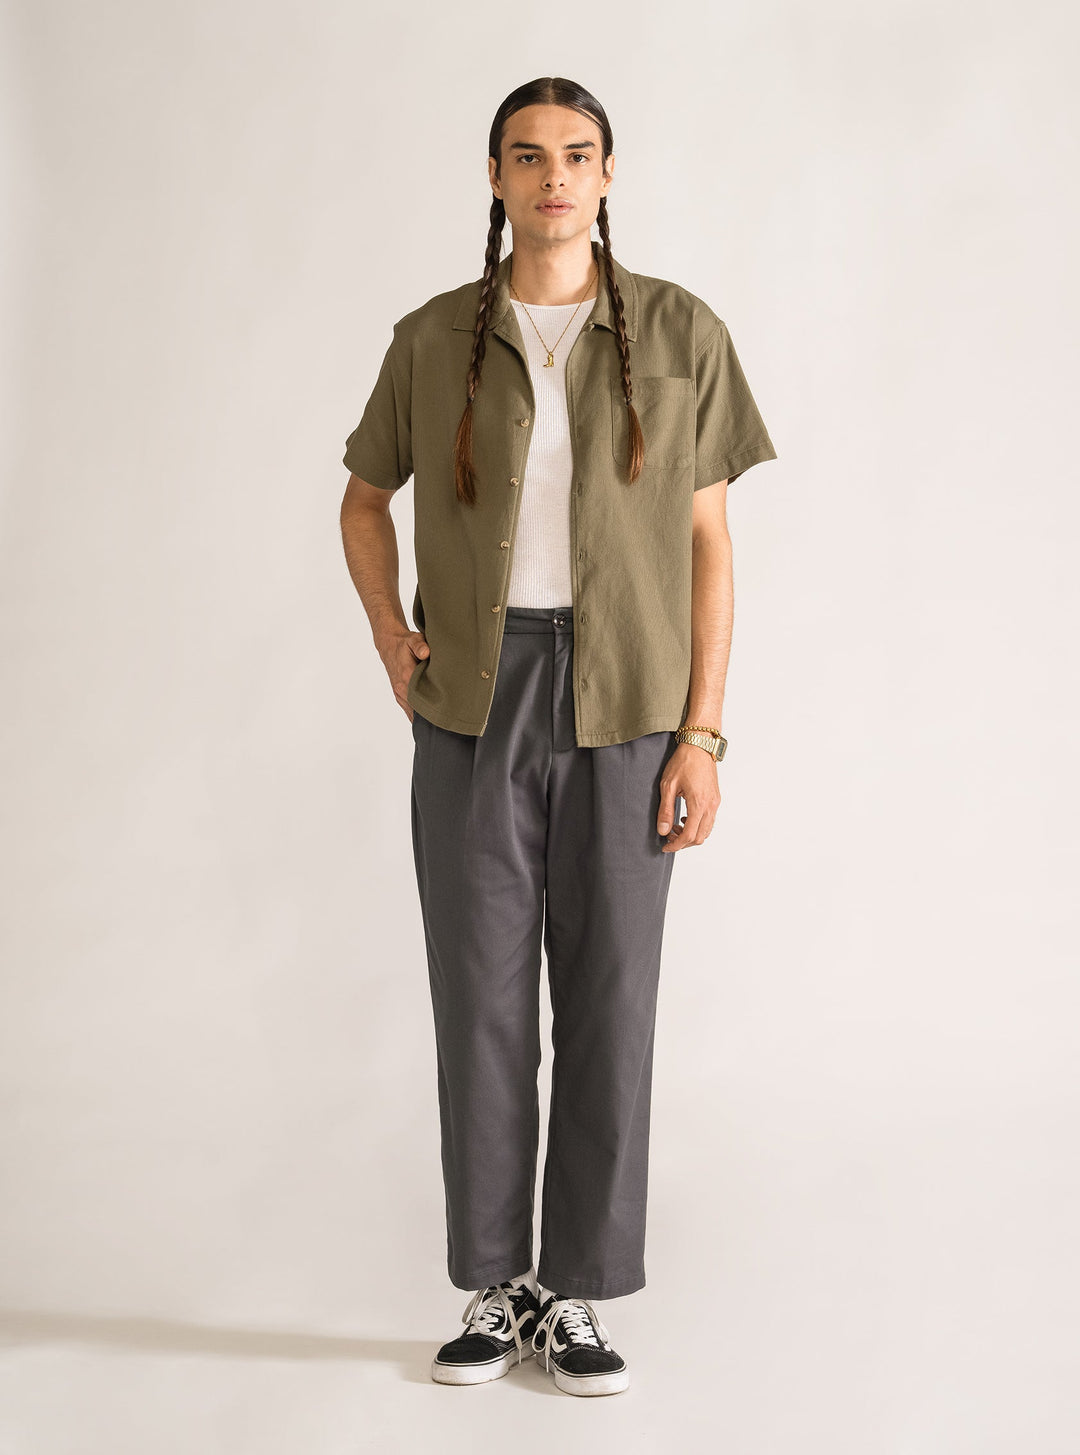 The Guayabera Food and Family, Olive Green